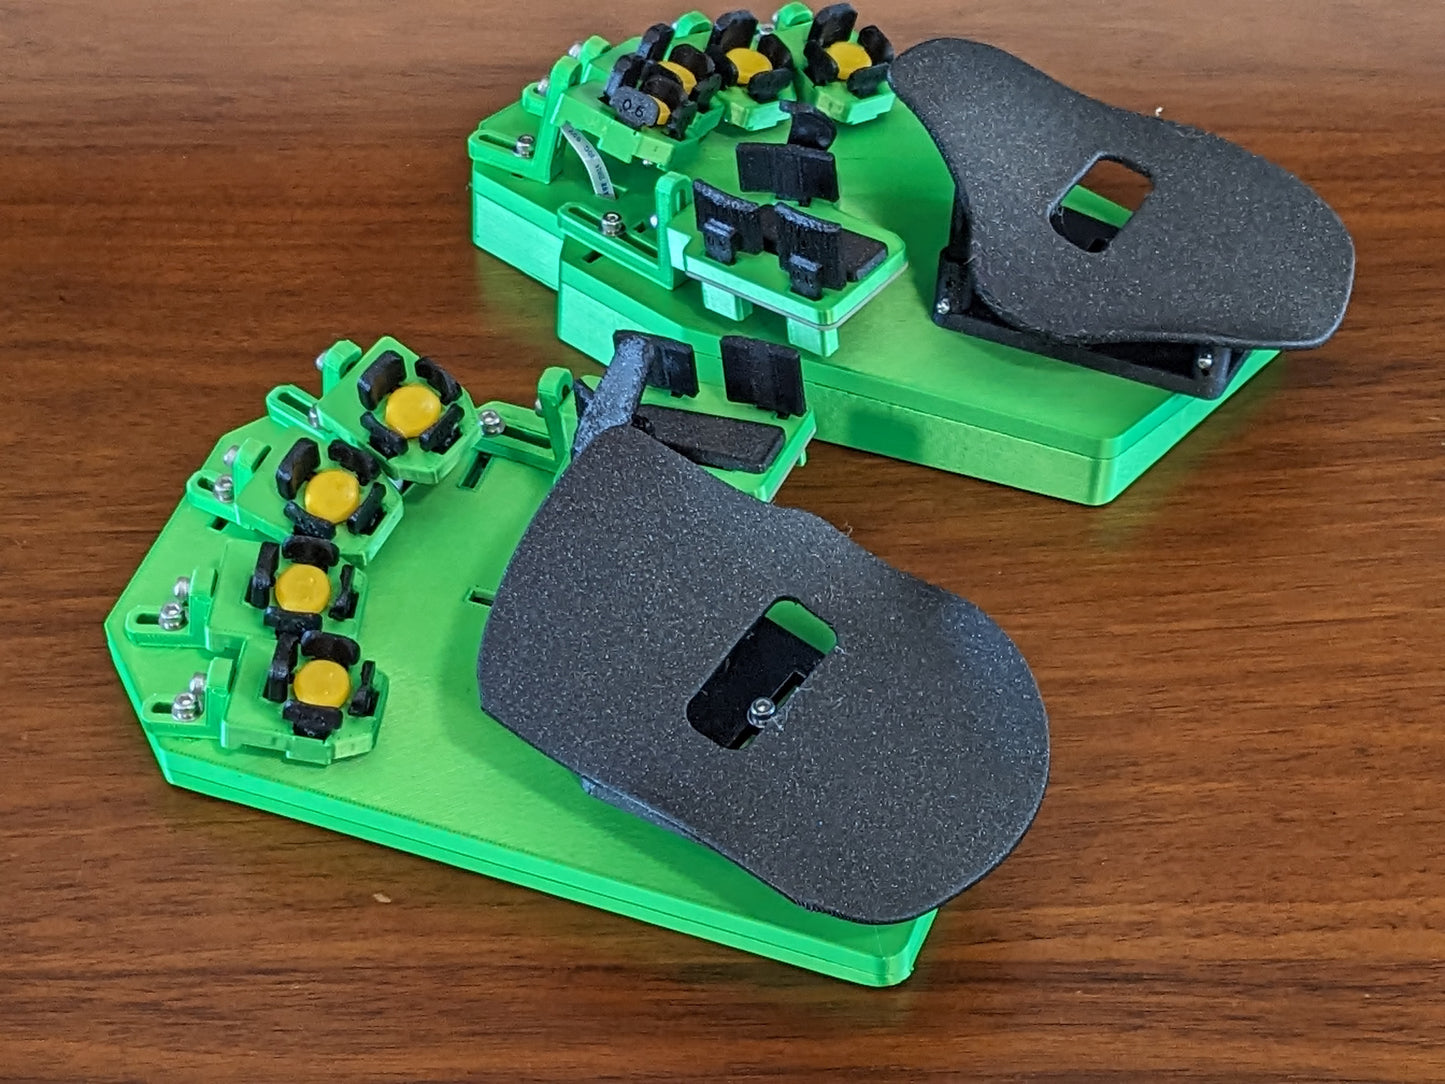 Svalboard ALPHA - Custom colors included!